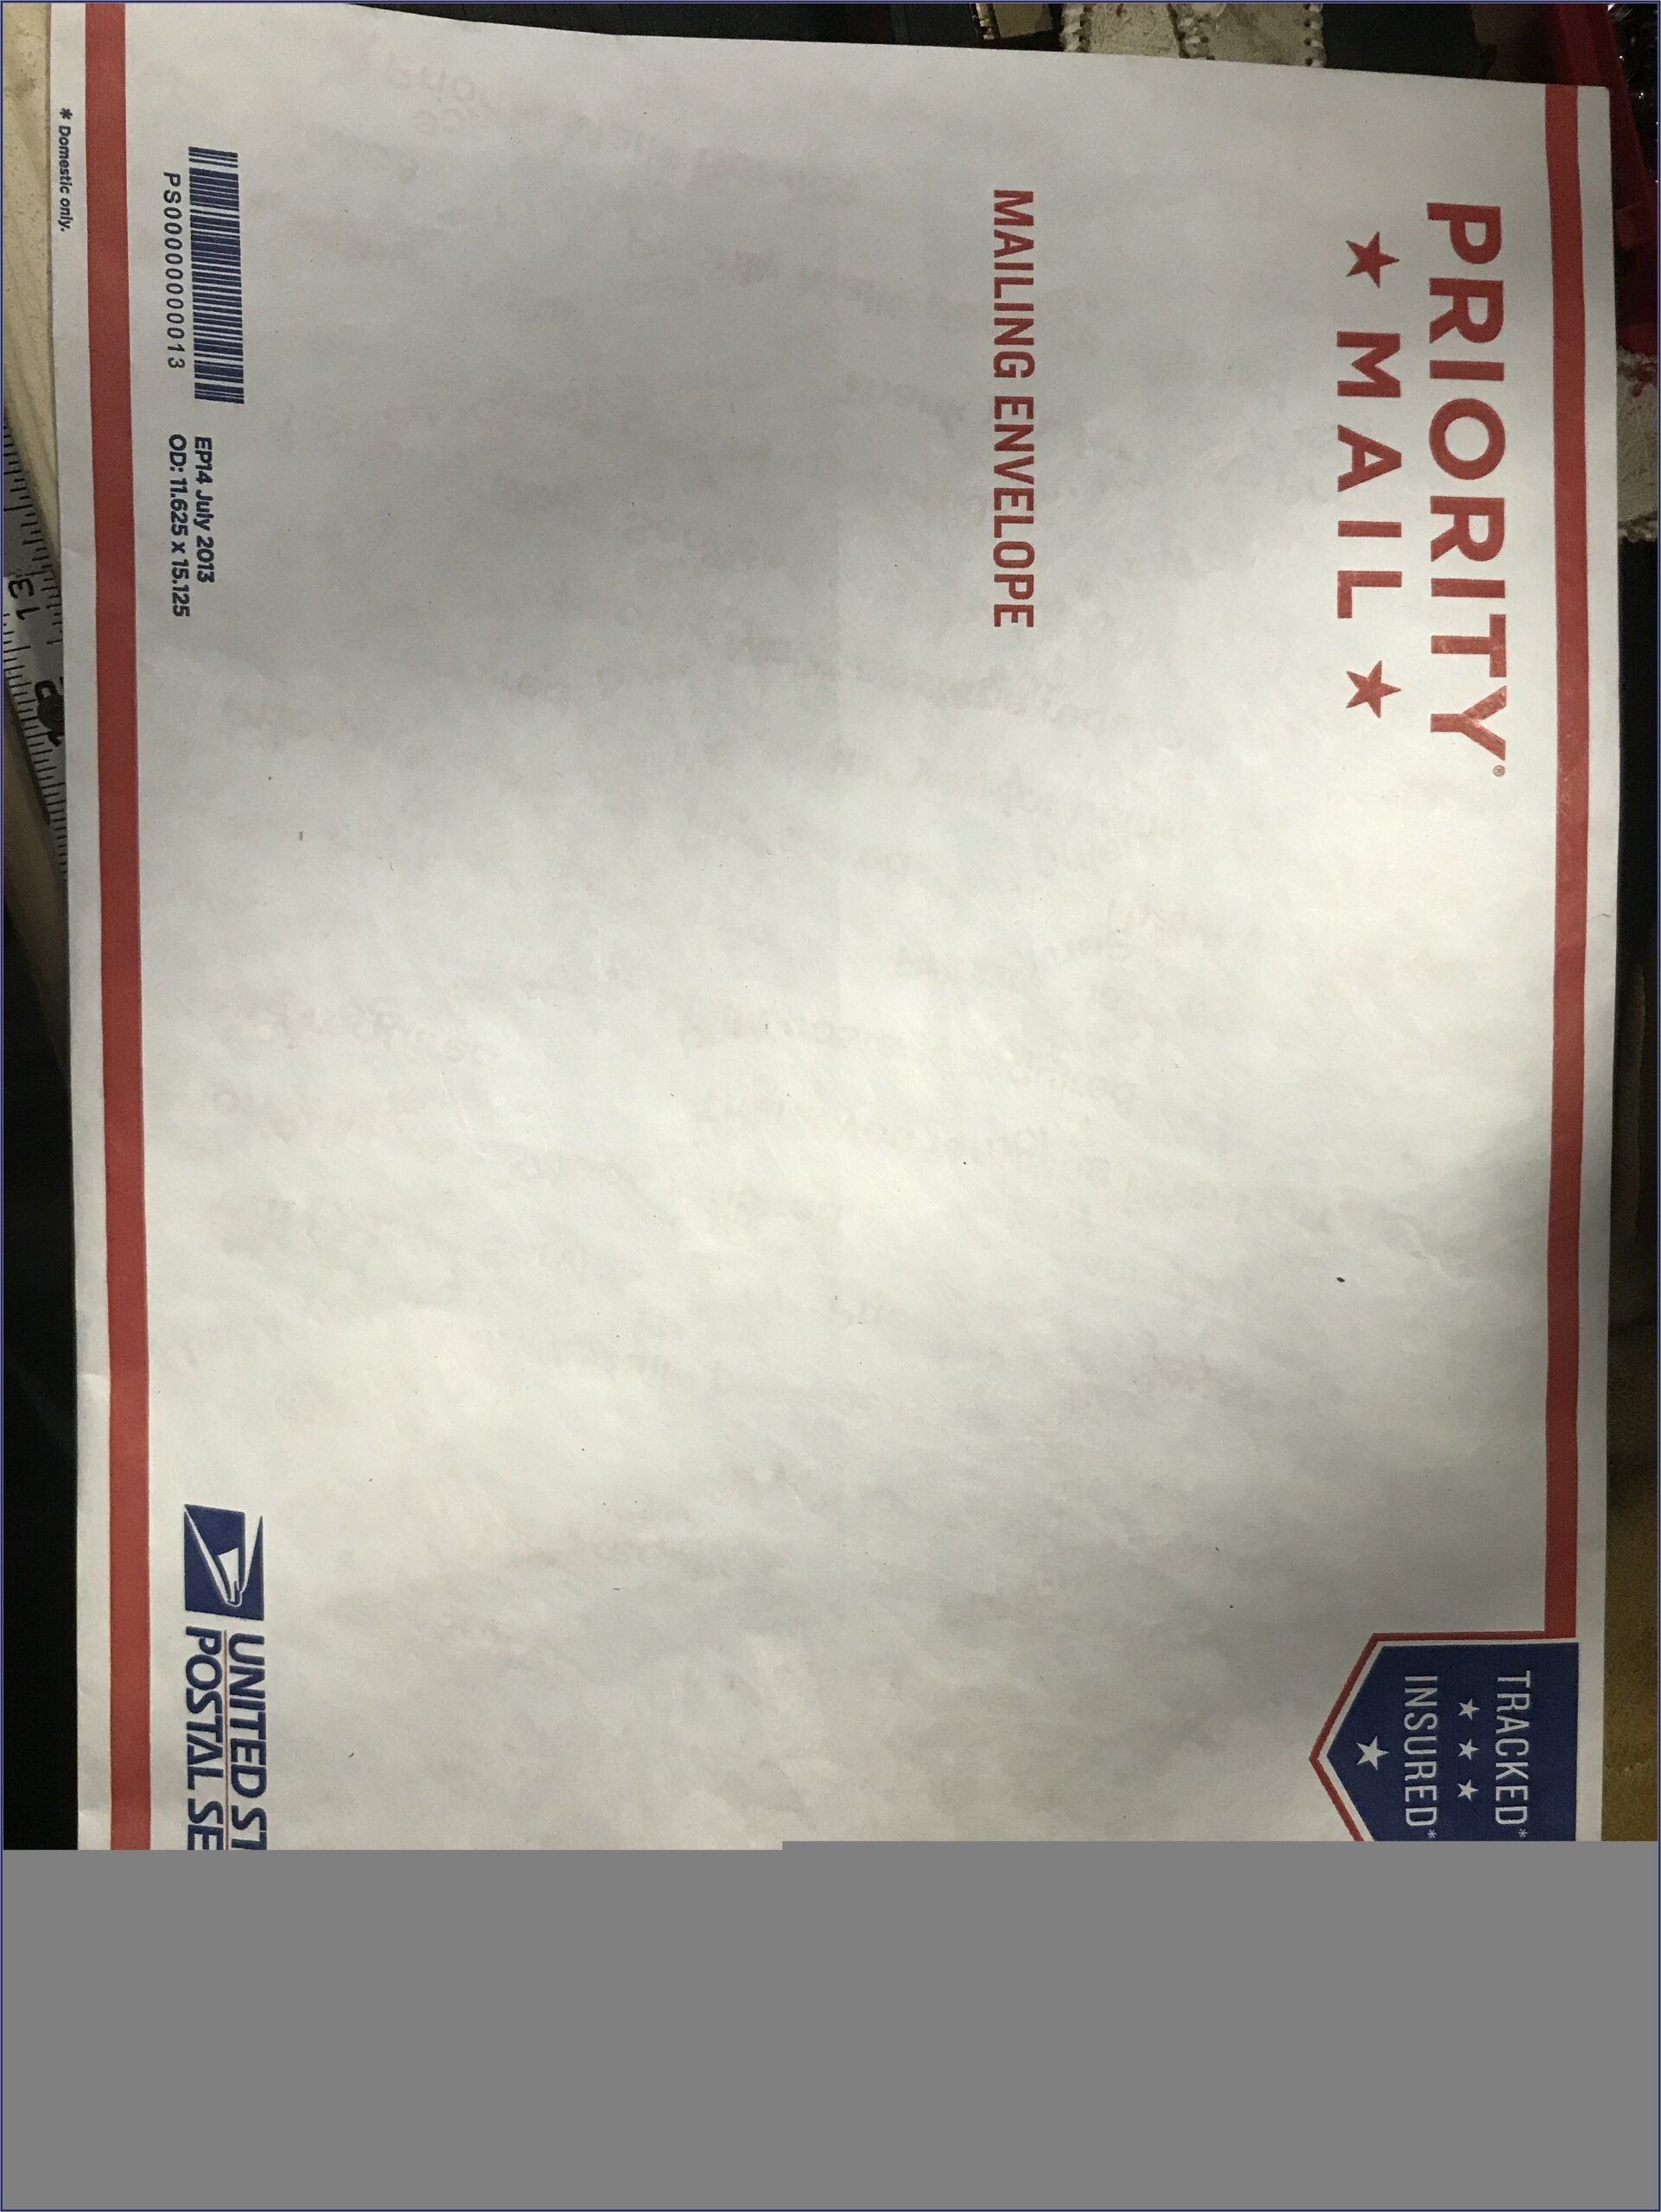 Usps Priority Mail Padded Envelope Size